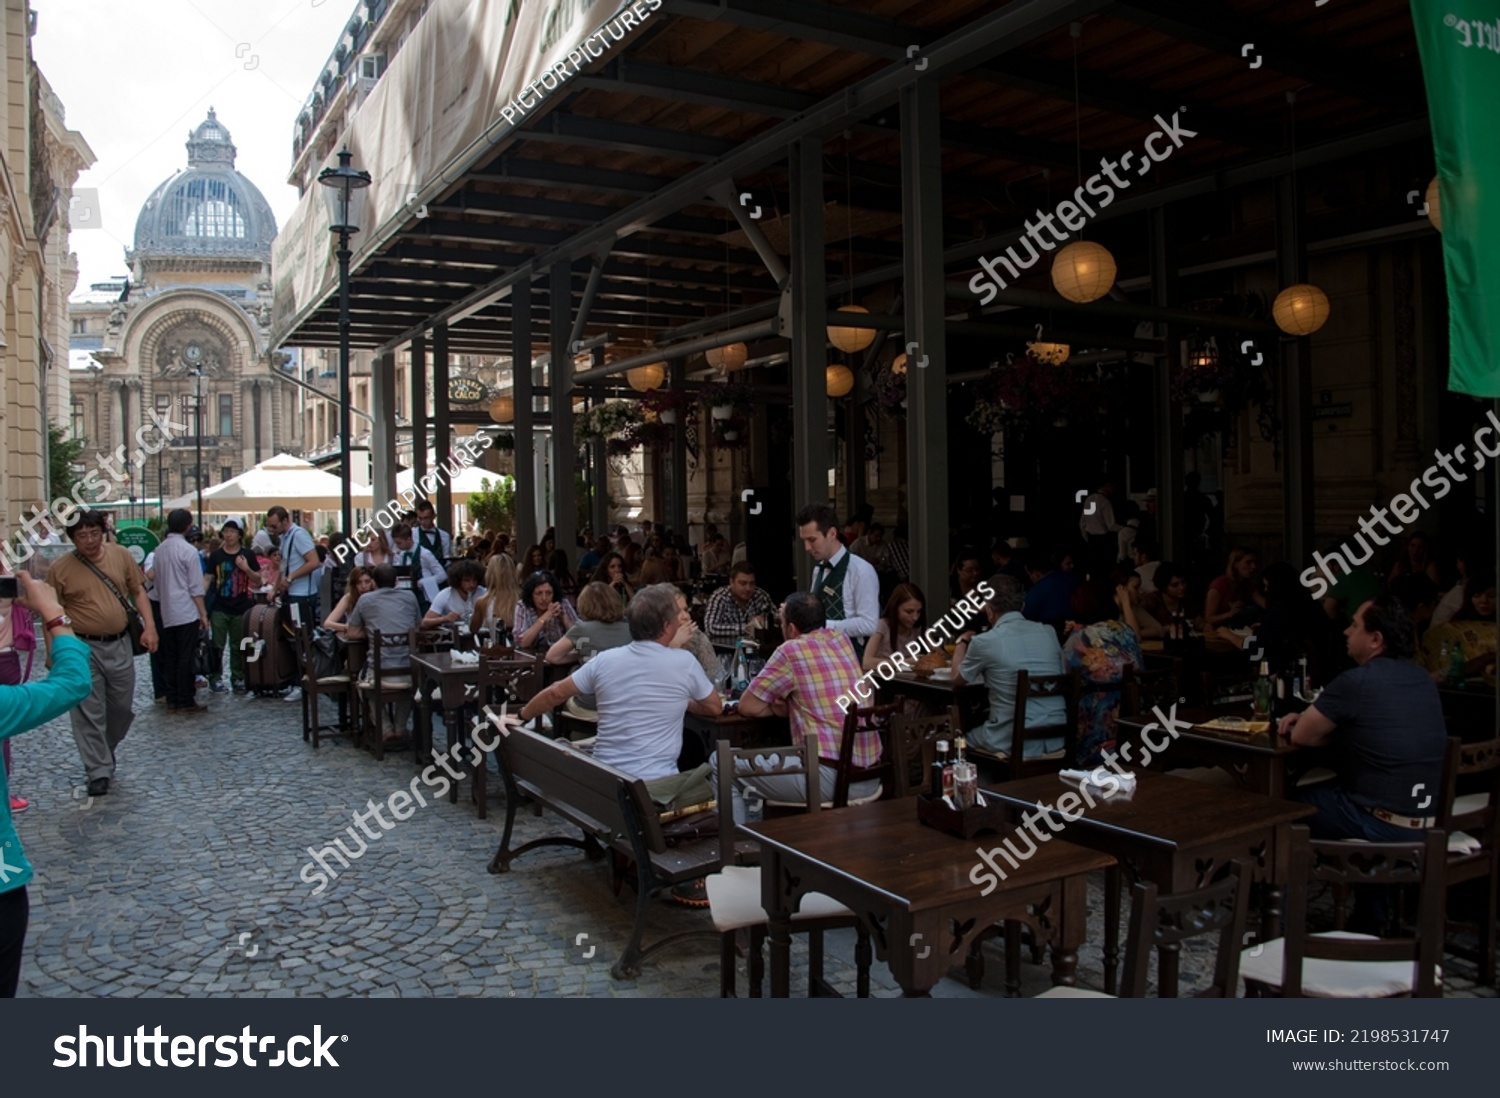 Stock Photo Bucharest Romania Jun Outside Dining At Caru Cu Bere The Beer Cart A Bar And 2198531747 